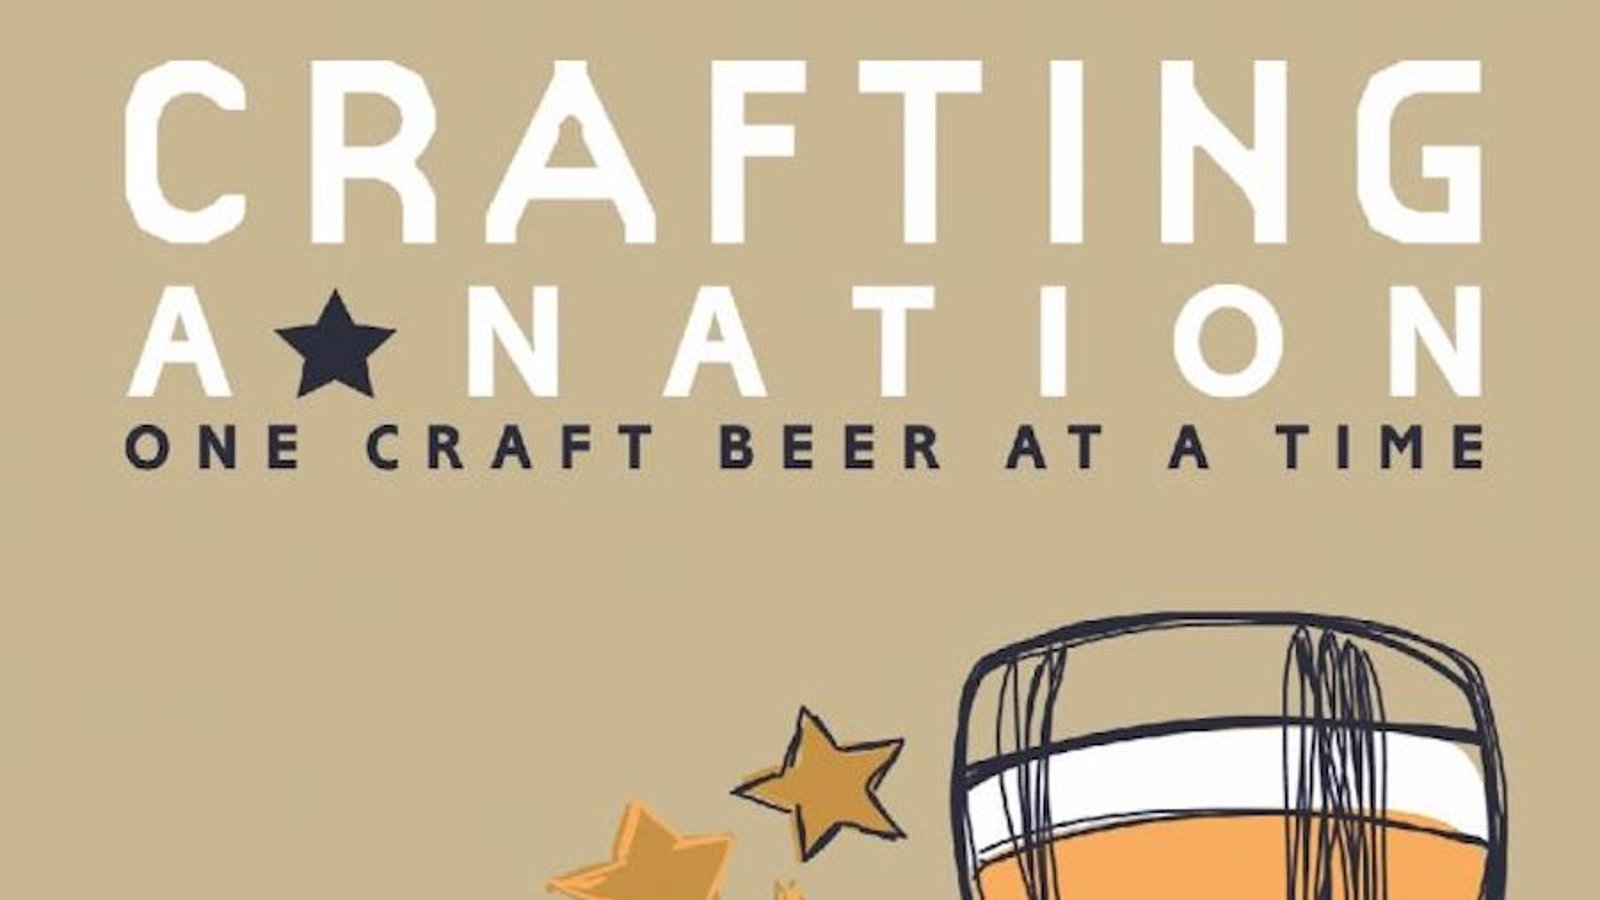 Crafting a Nation - The American Craft Beer Industry